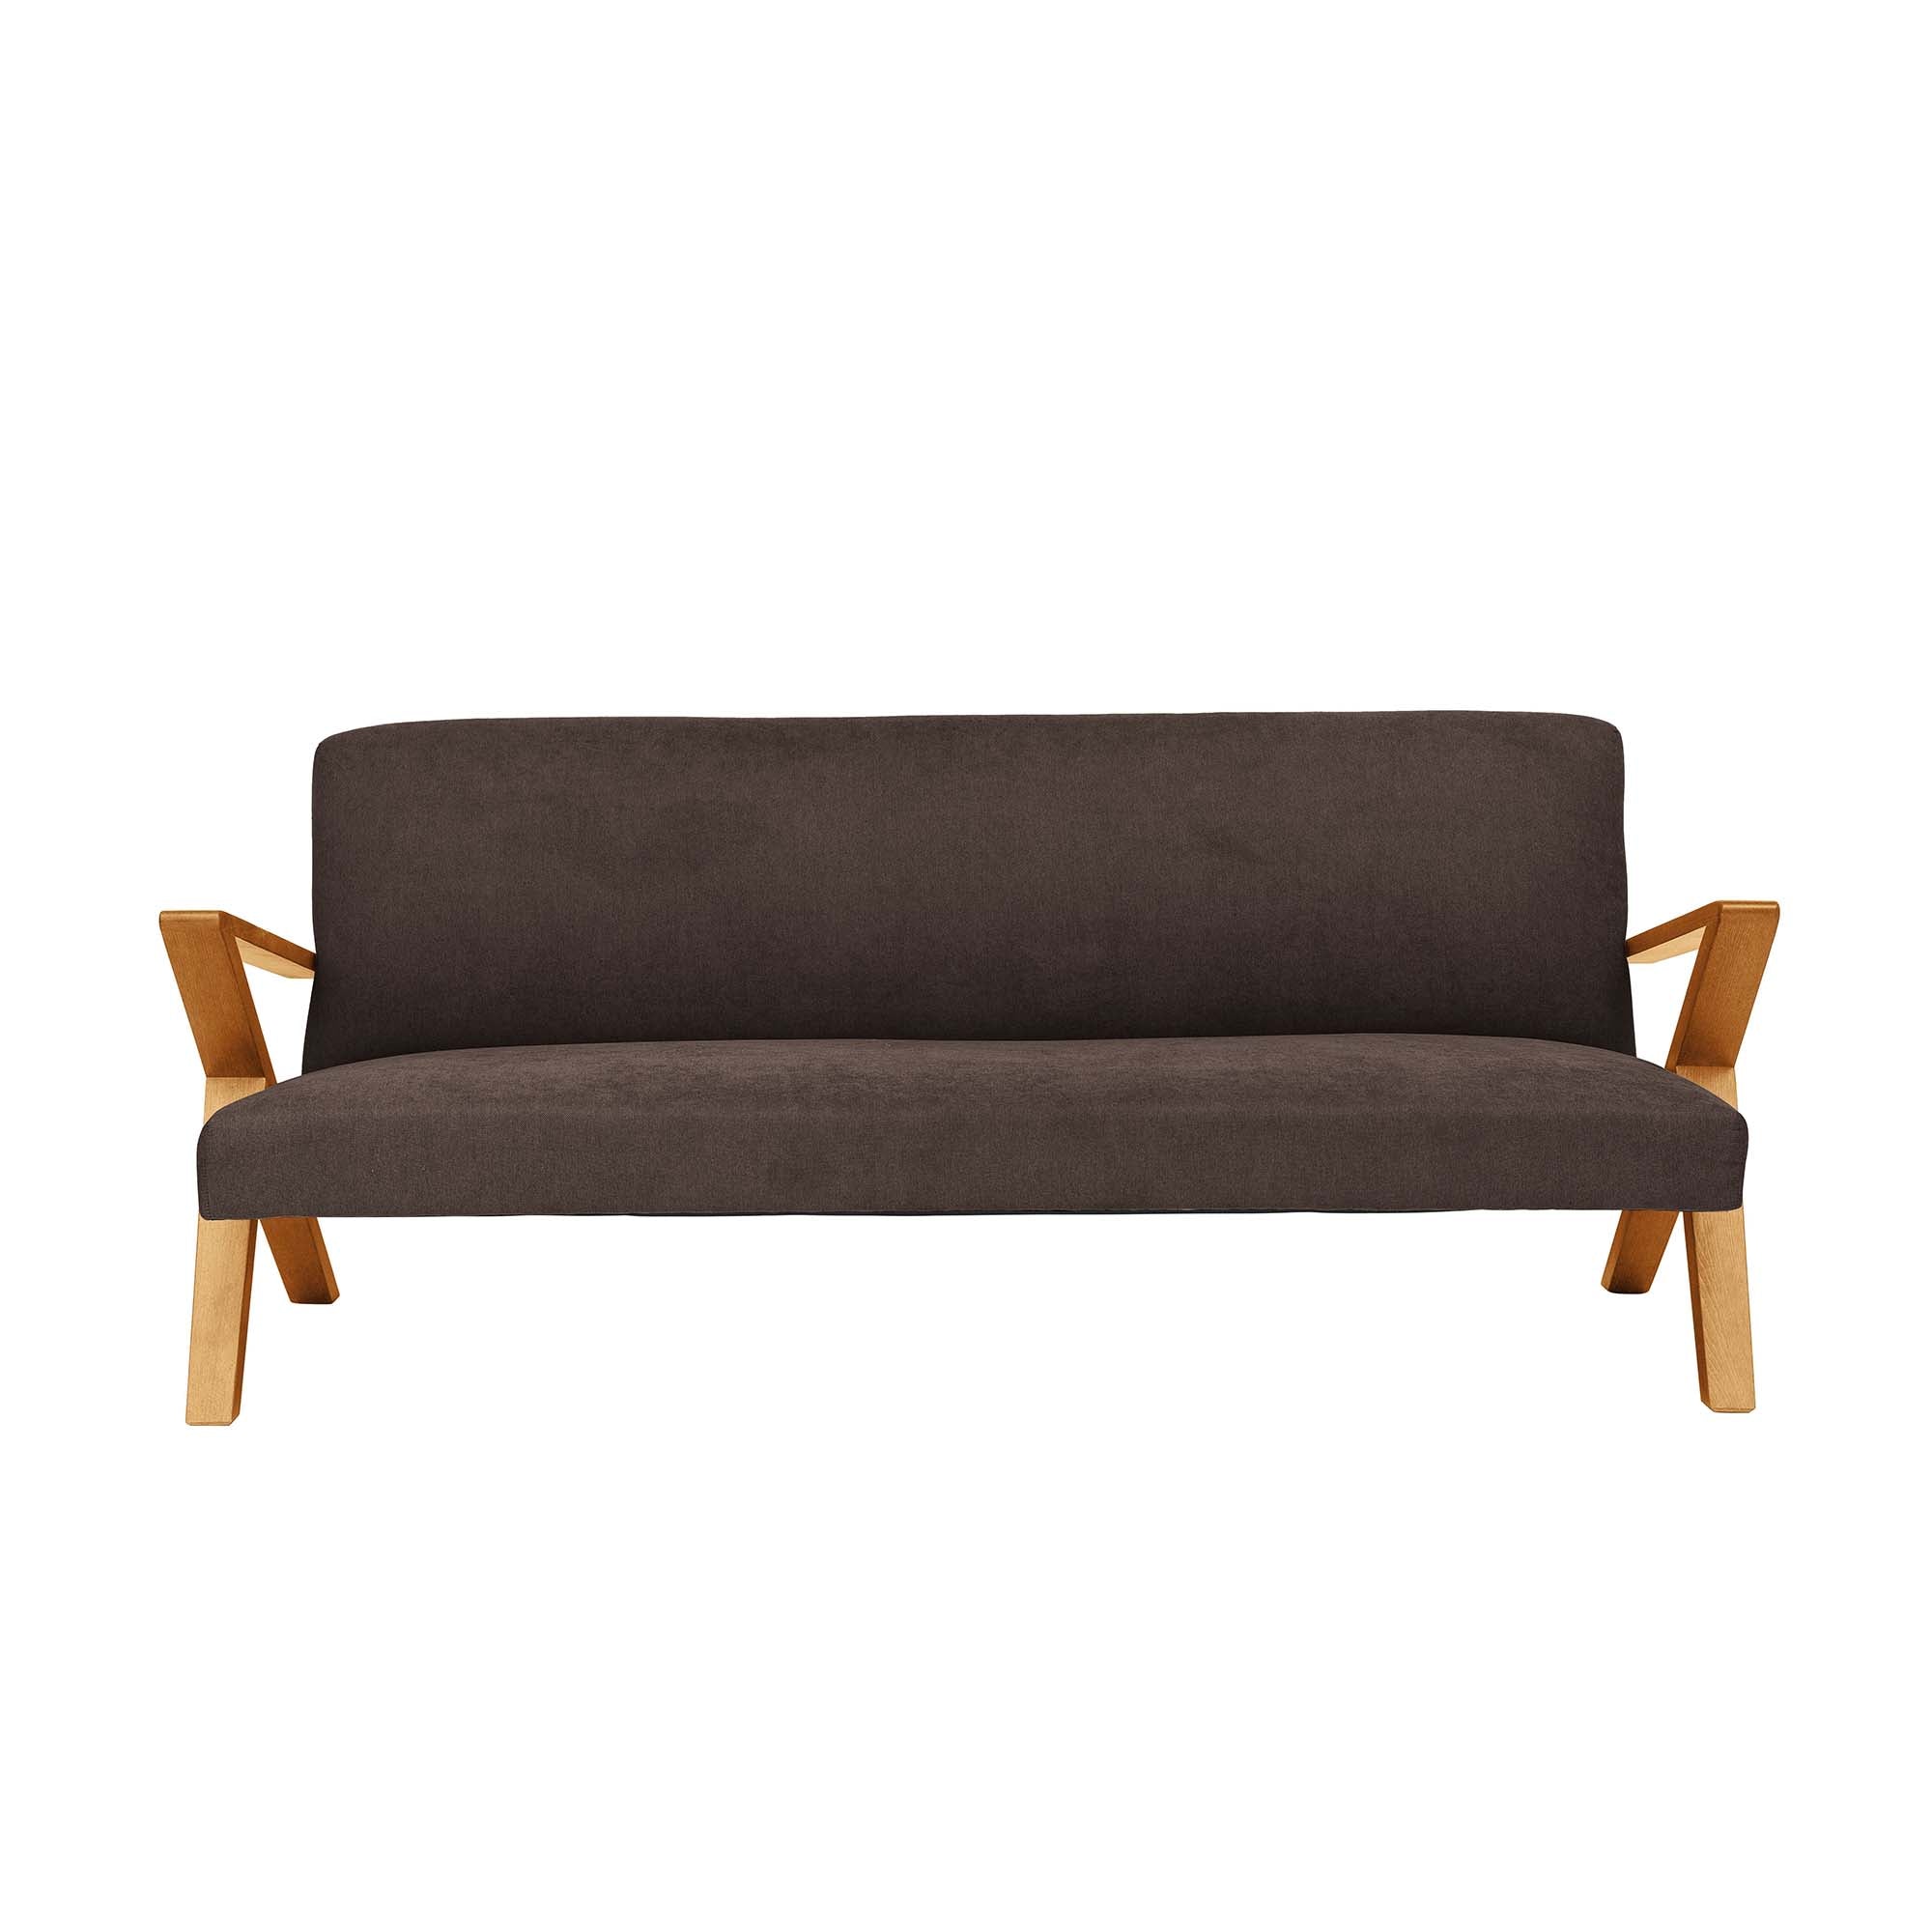 4-seater Sofa Beech Wood Frame, Oak Colour brown fabric, front view